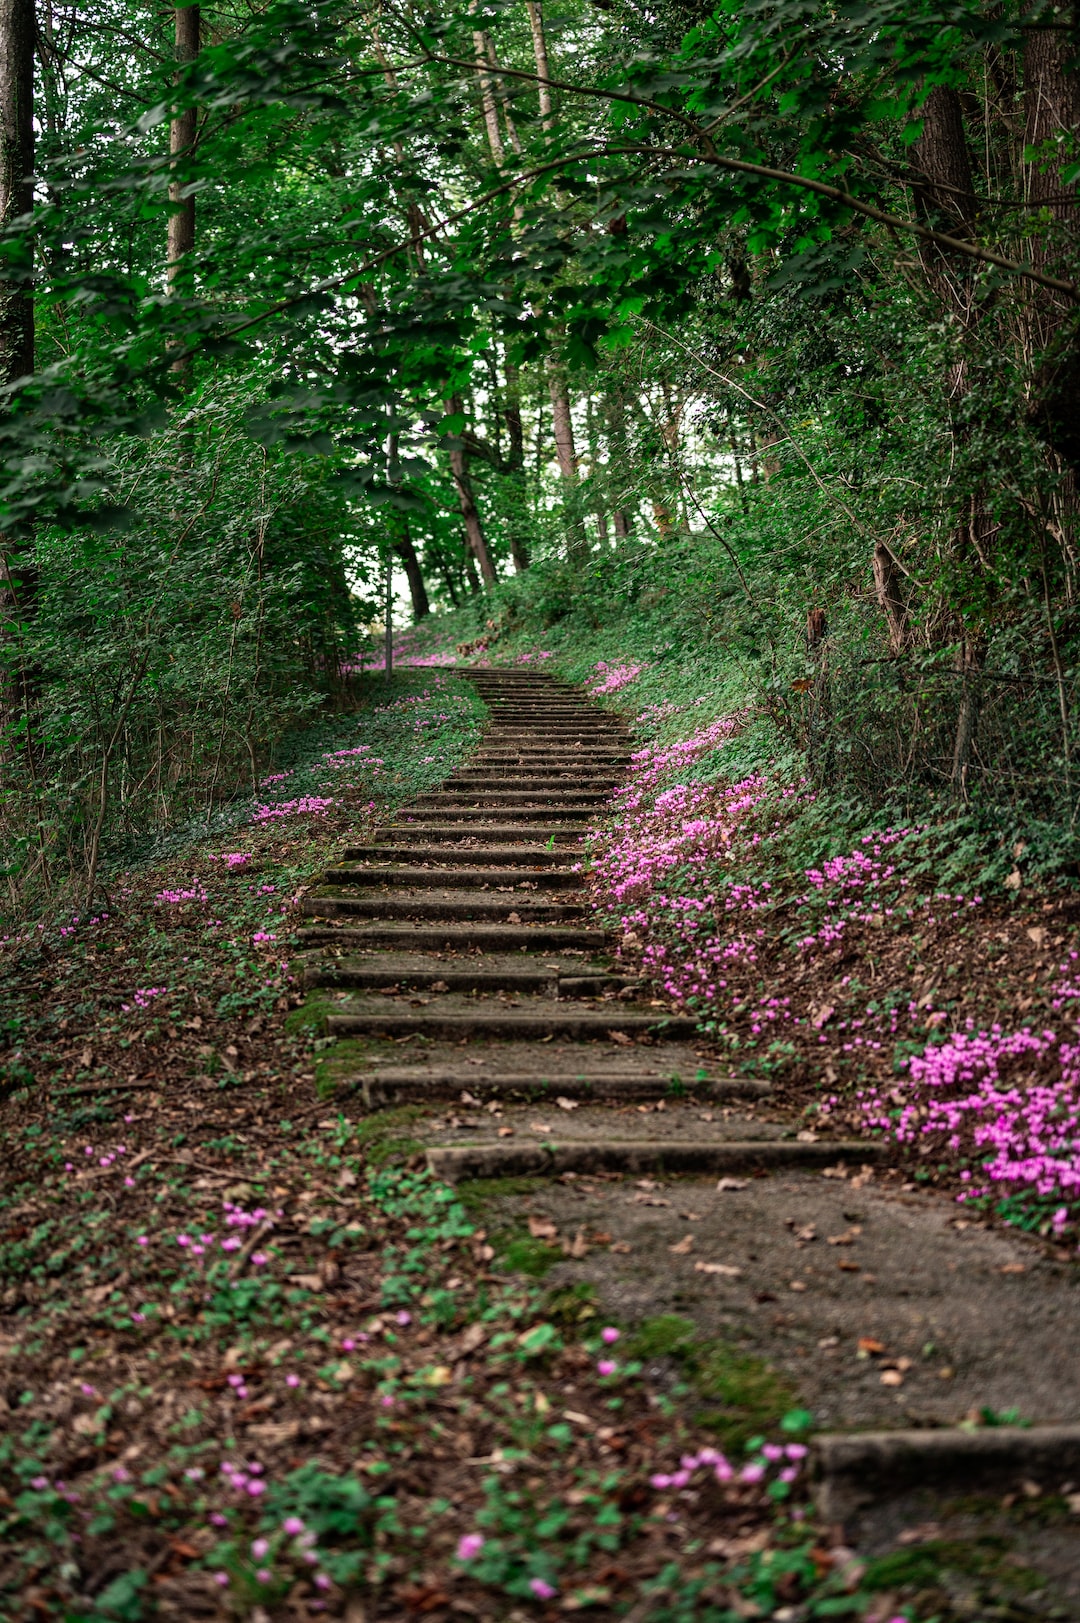 Path of stairs leading up through wildflowers and trees